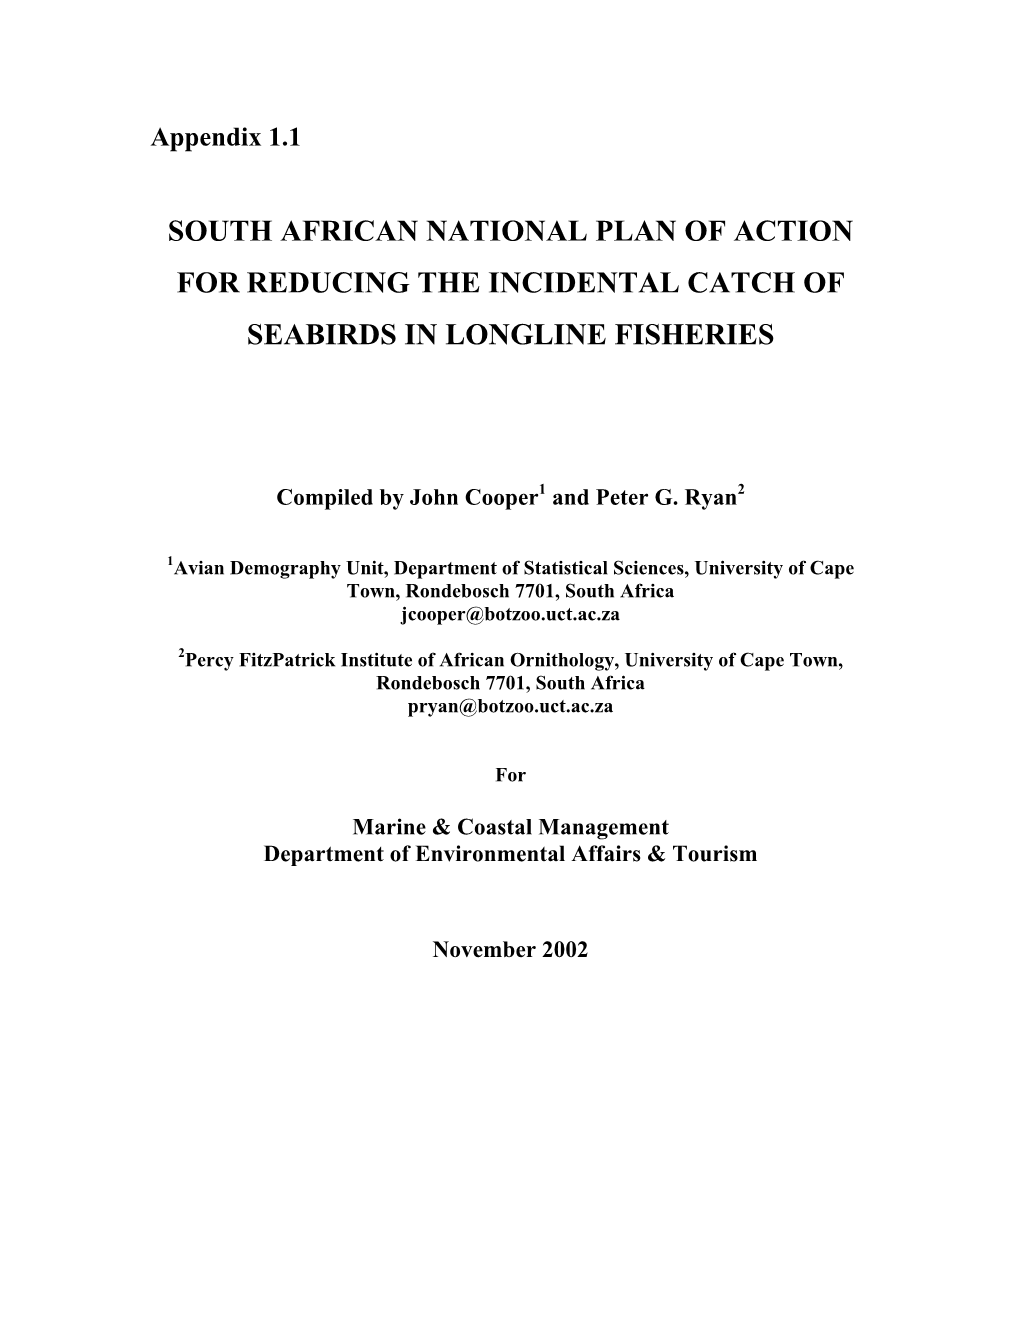 South African National Plan of Action for Reducing the Incidental Catch of Seabirds in Longline Fisheries